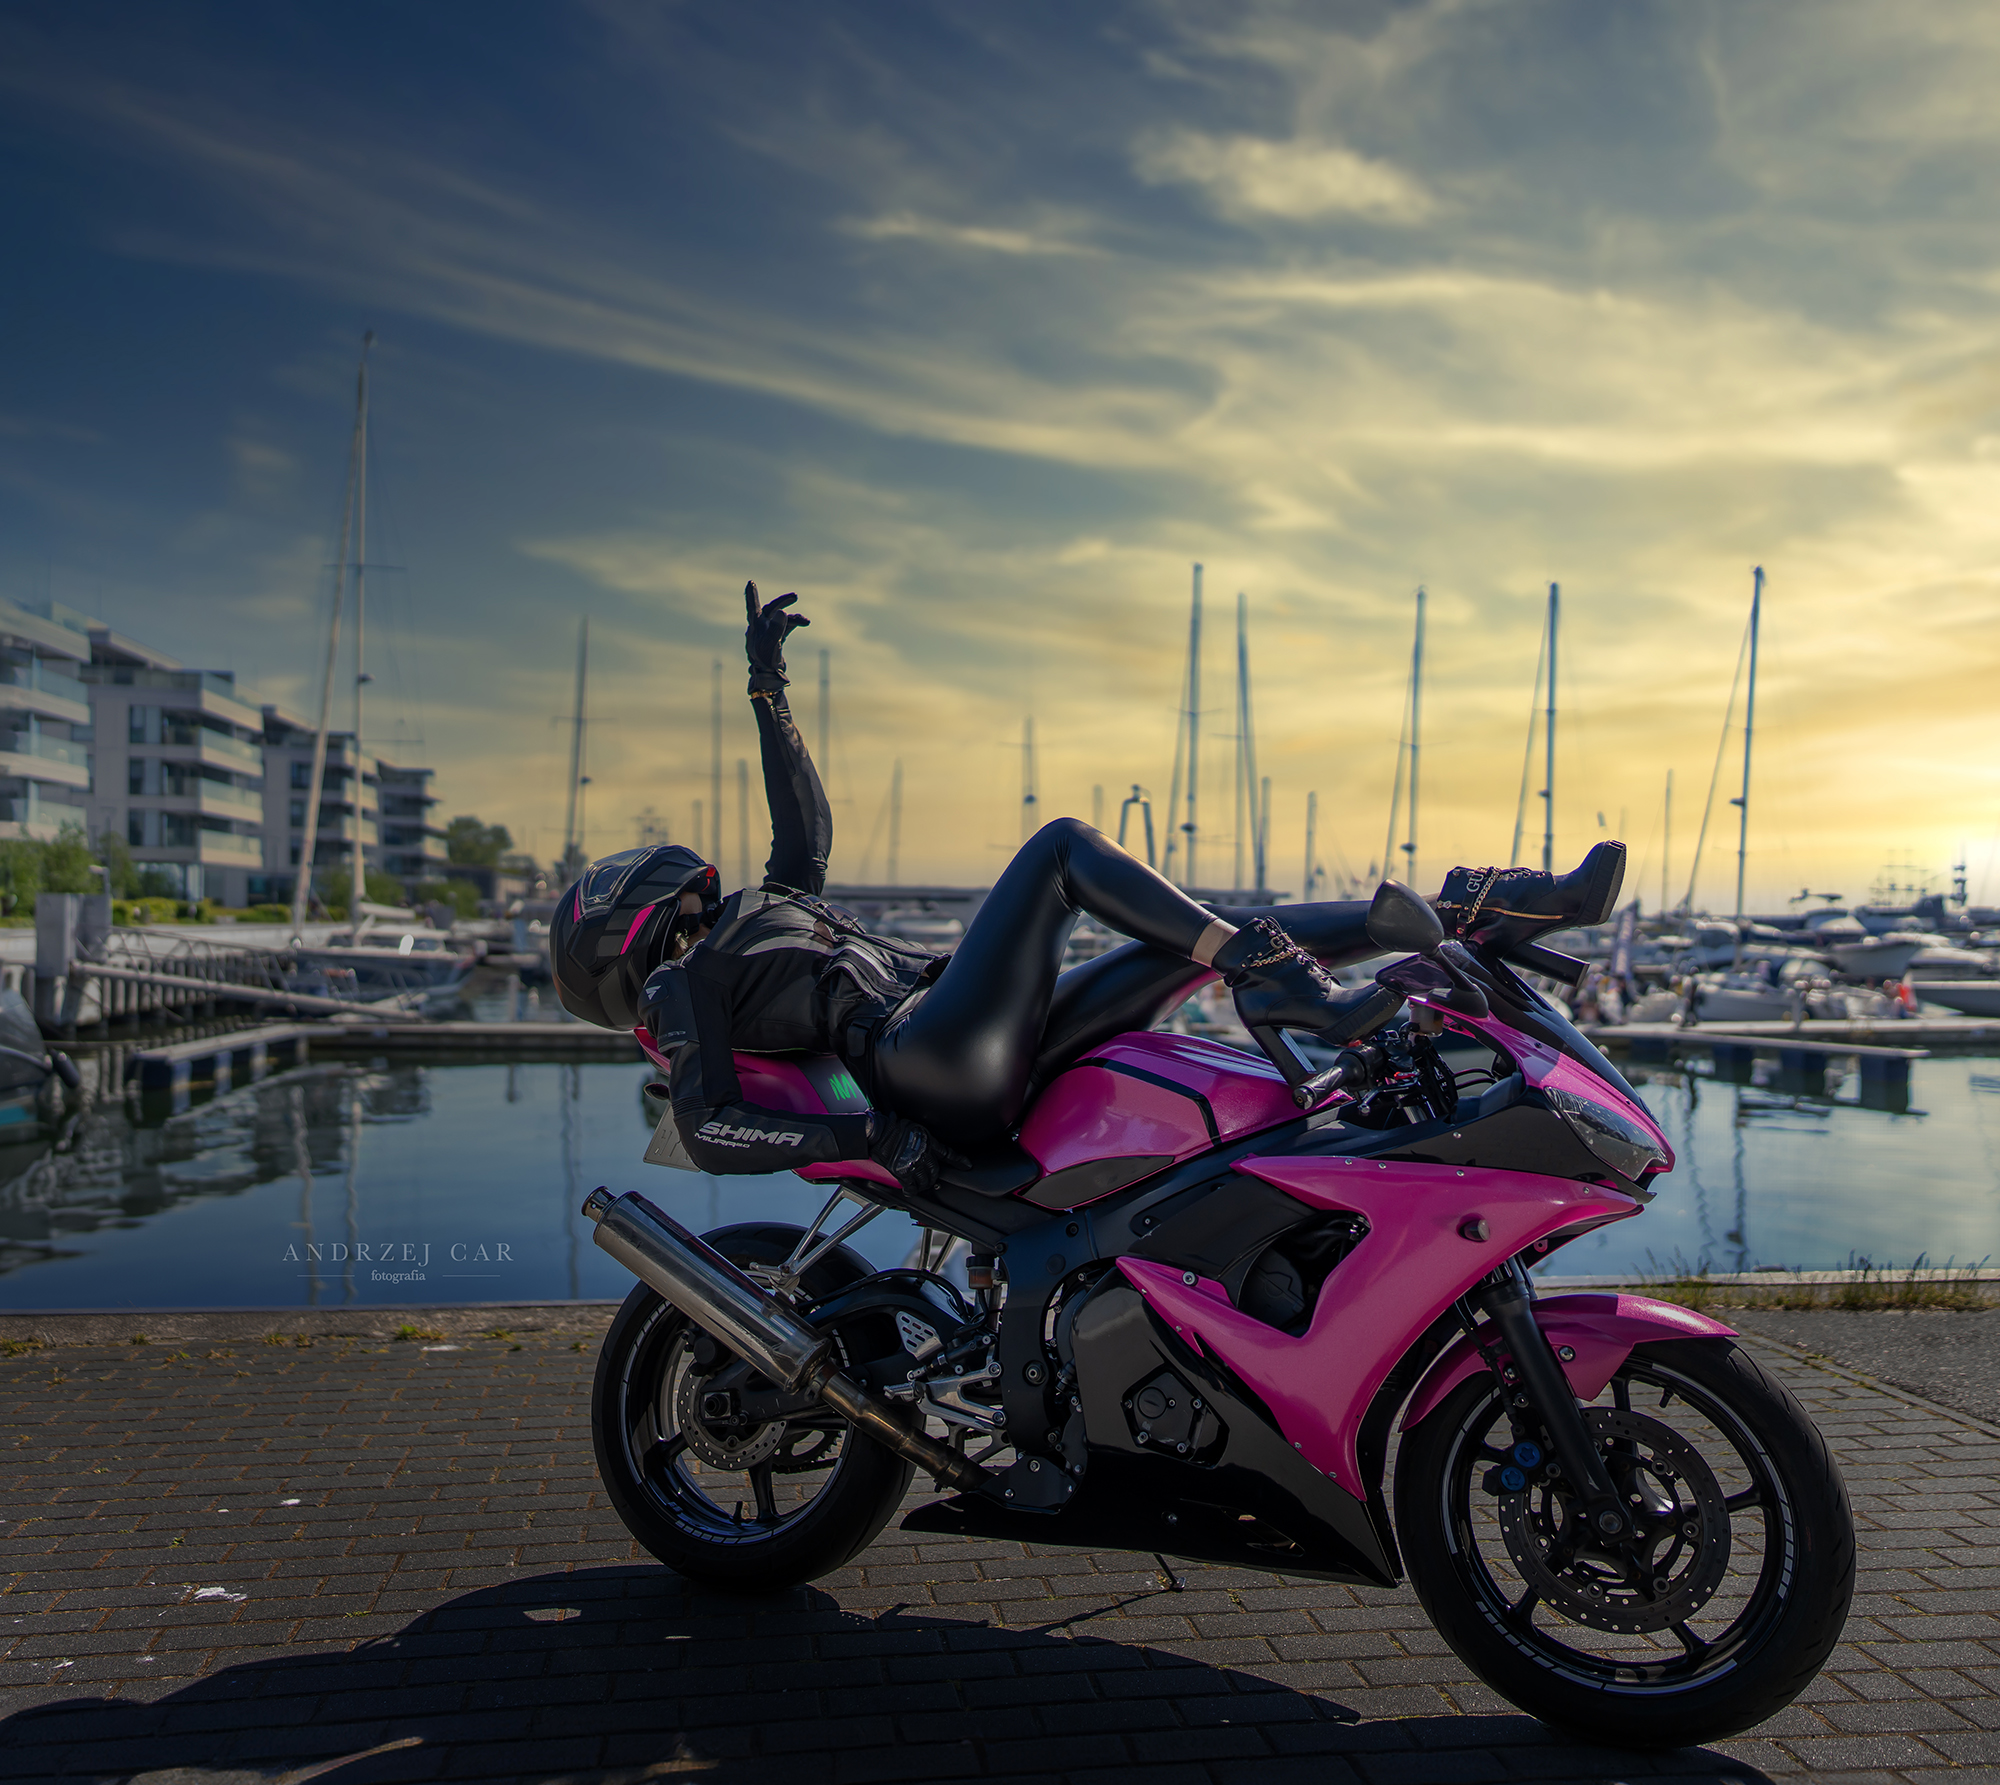 Andrzej Car Women Leather Motorcycle Pink Dock Women With Motorcycles 2000x1785